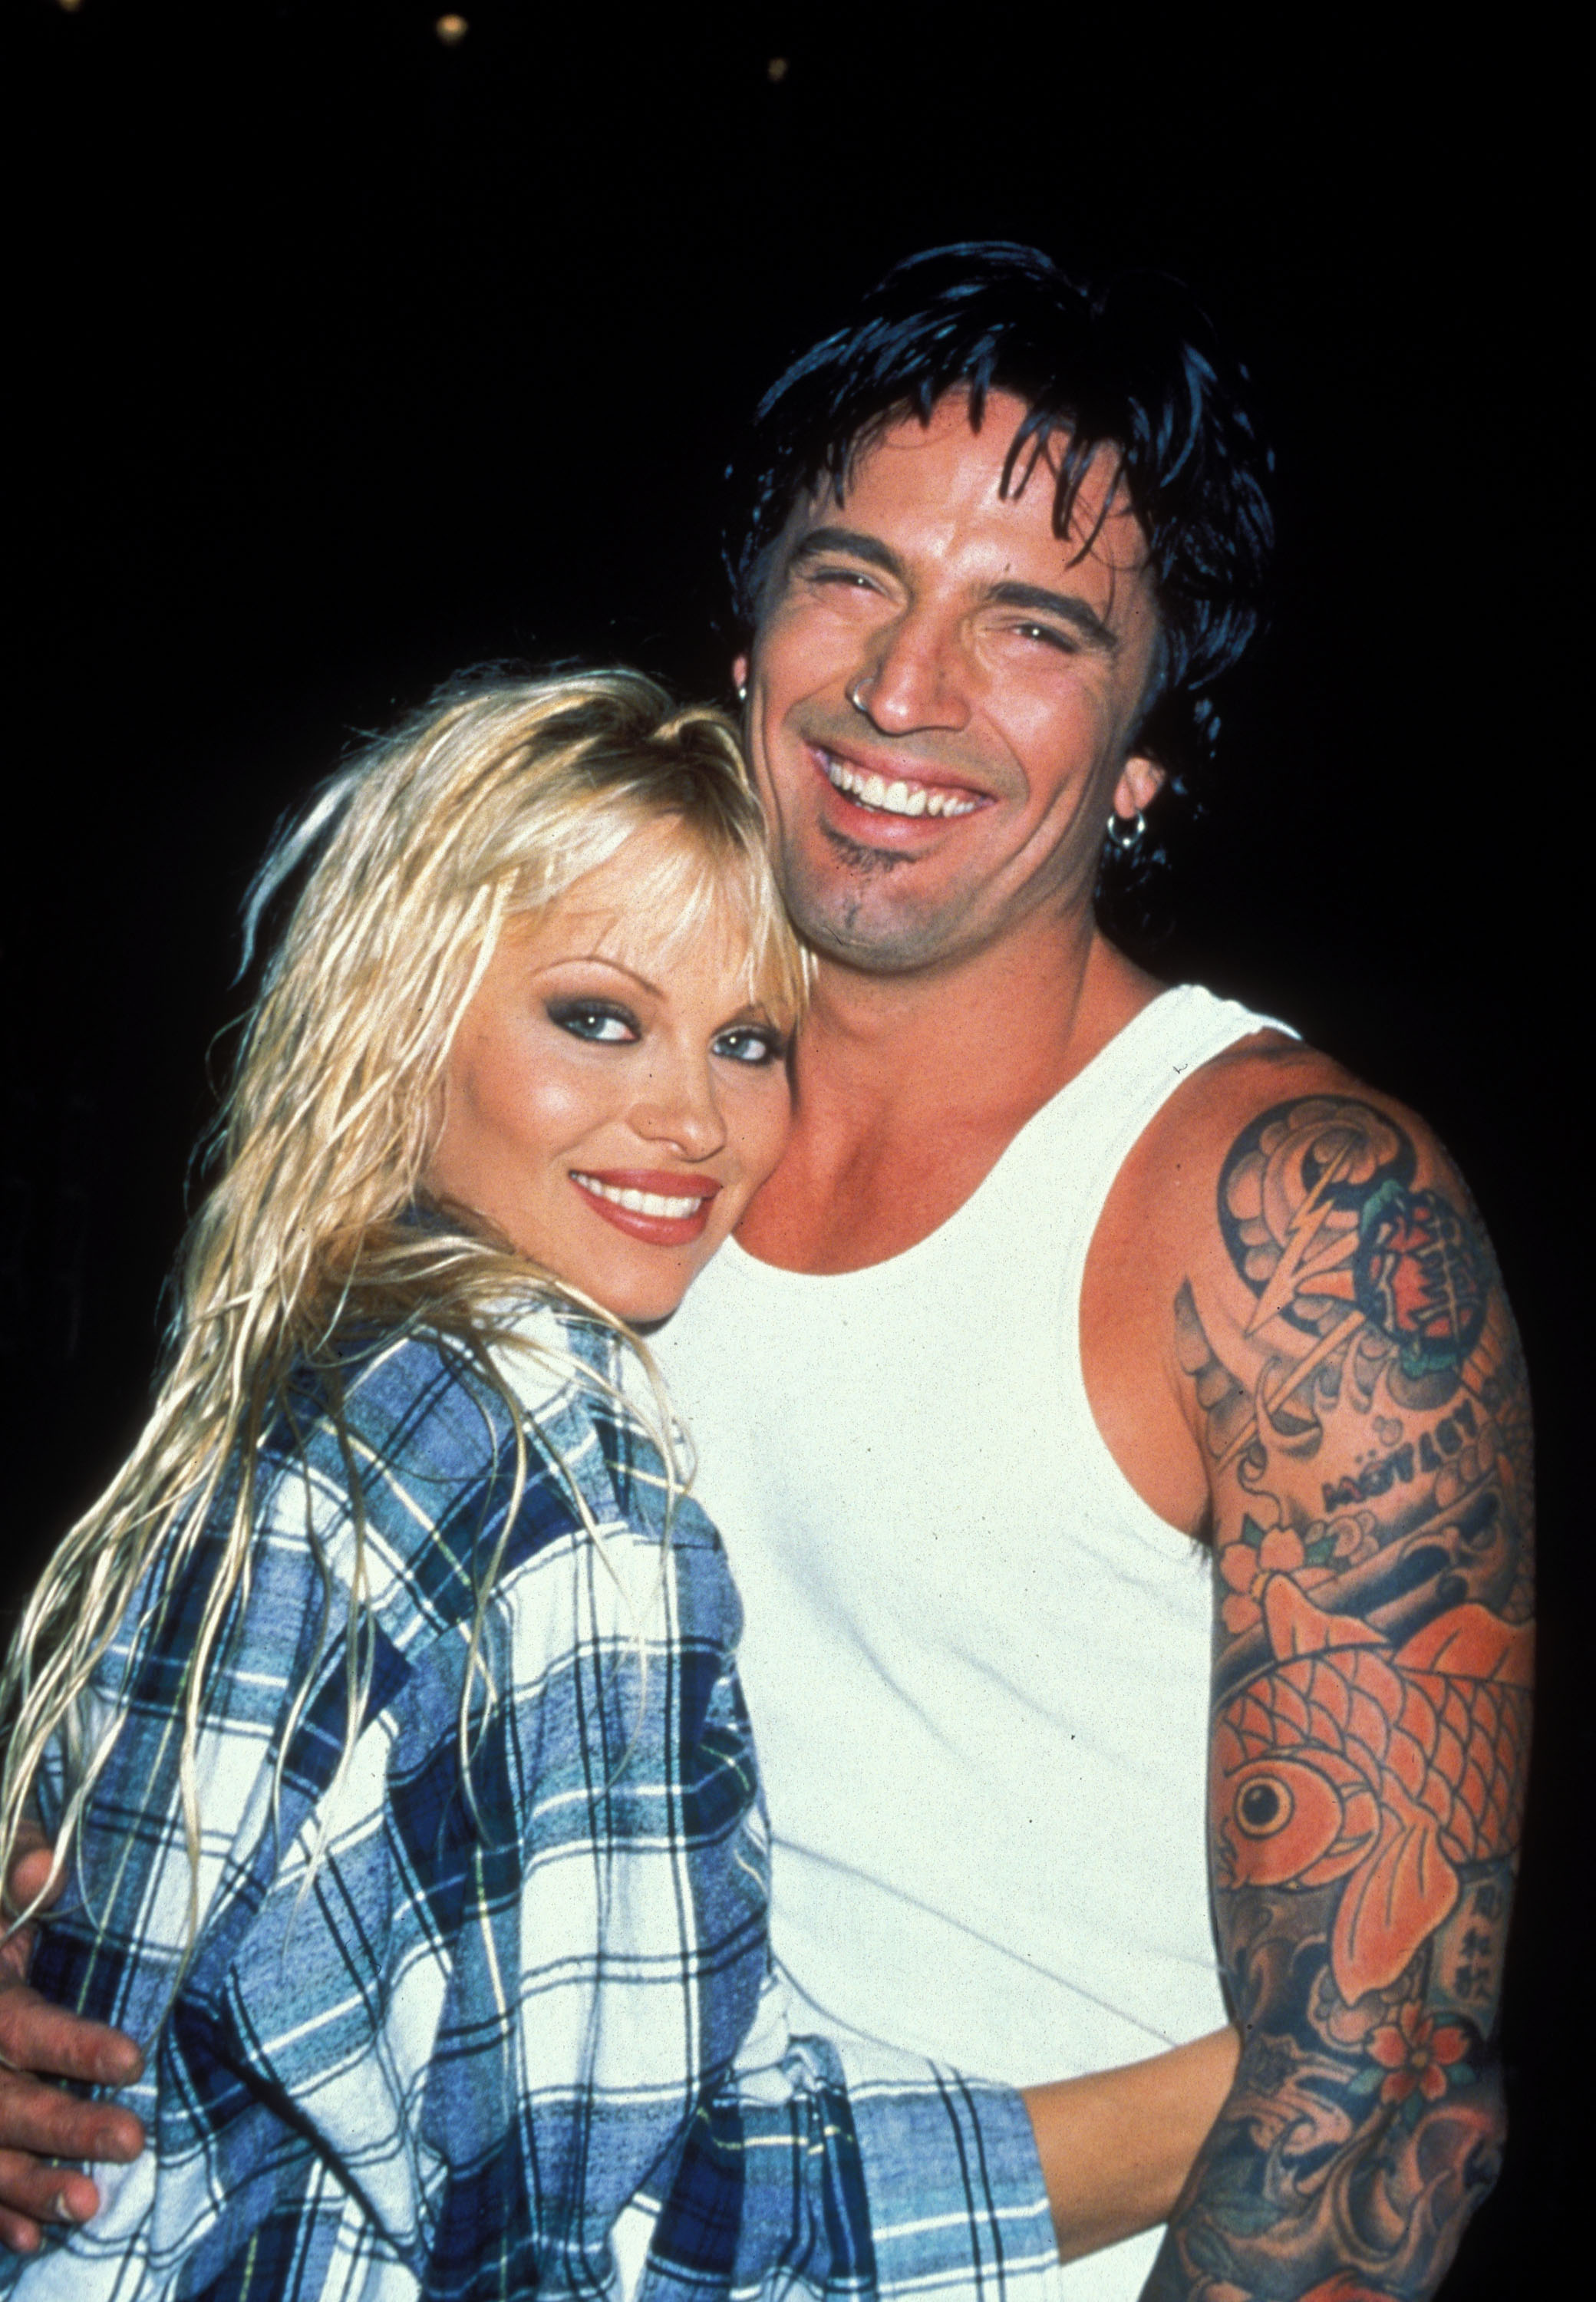 Pamela Anderson and Tommy Lee in California in 1996 | Source: Getty Images